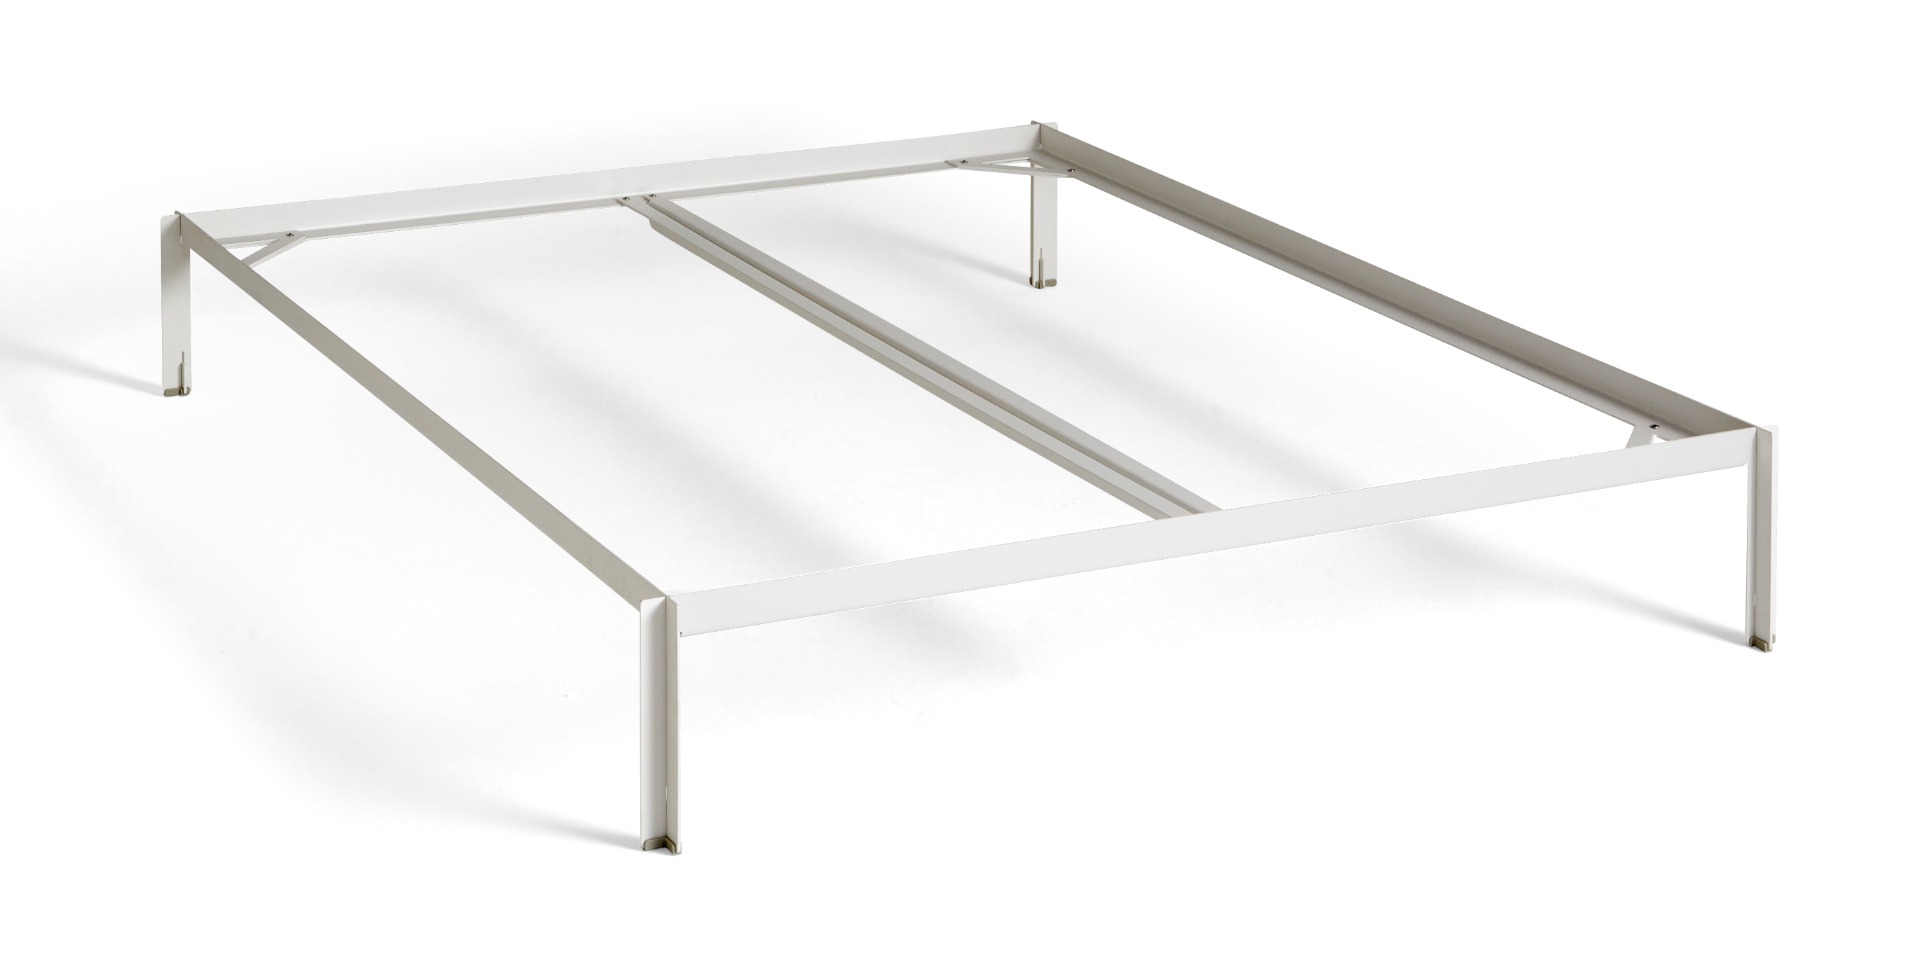 https://www.fundesign.nl/media/catalog/product/a/b/ab073-a666-aa56_connect_bed_white_160x200.jpg